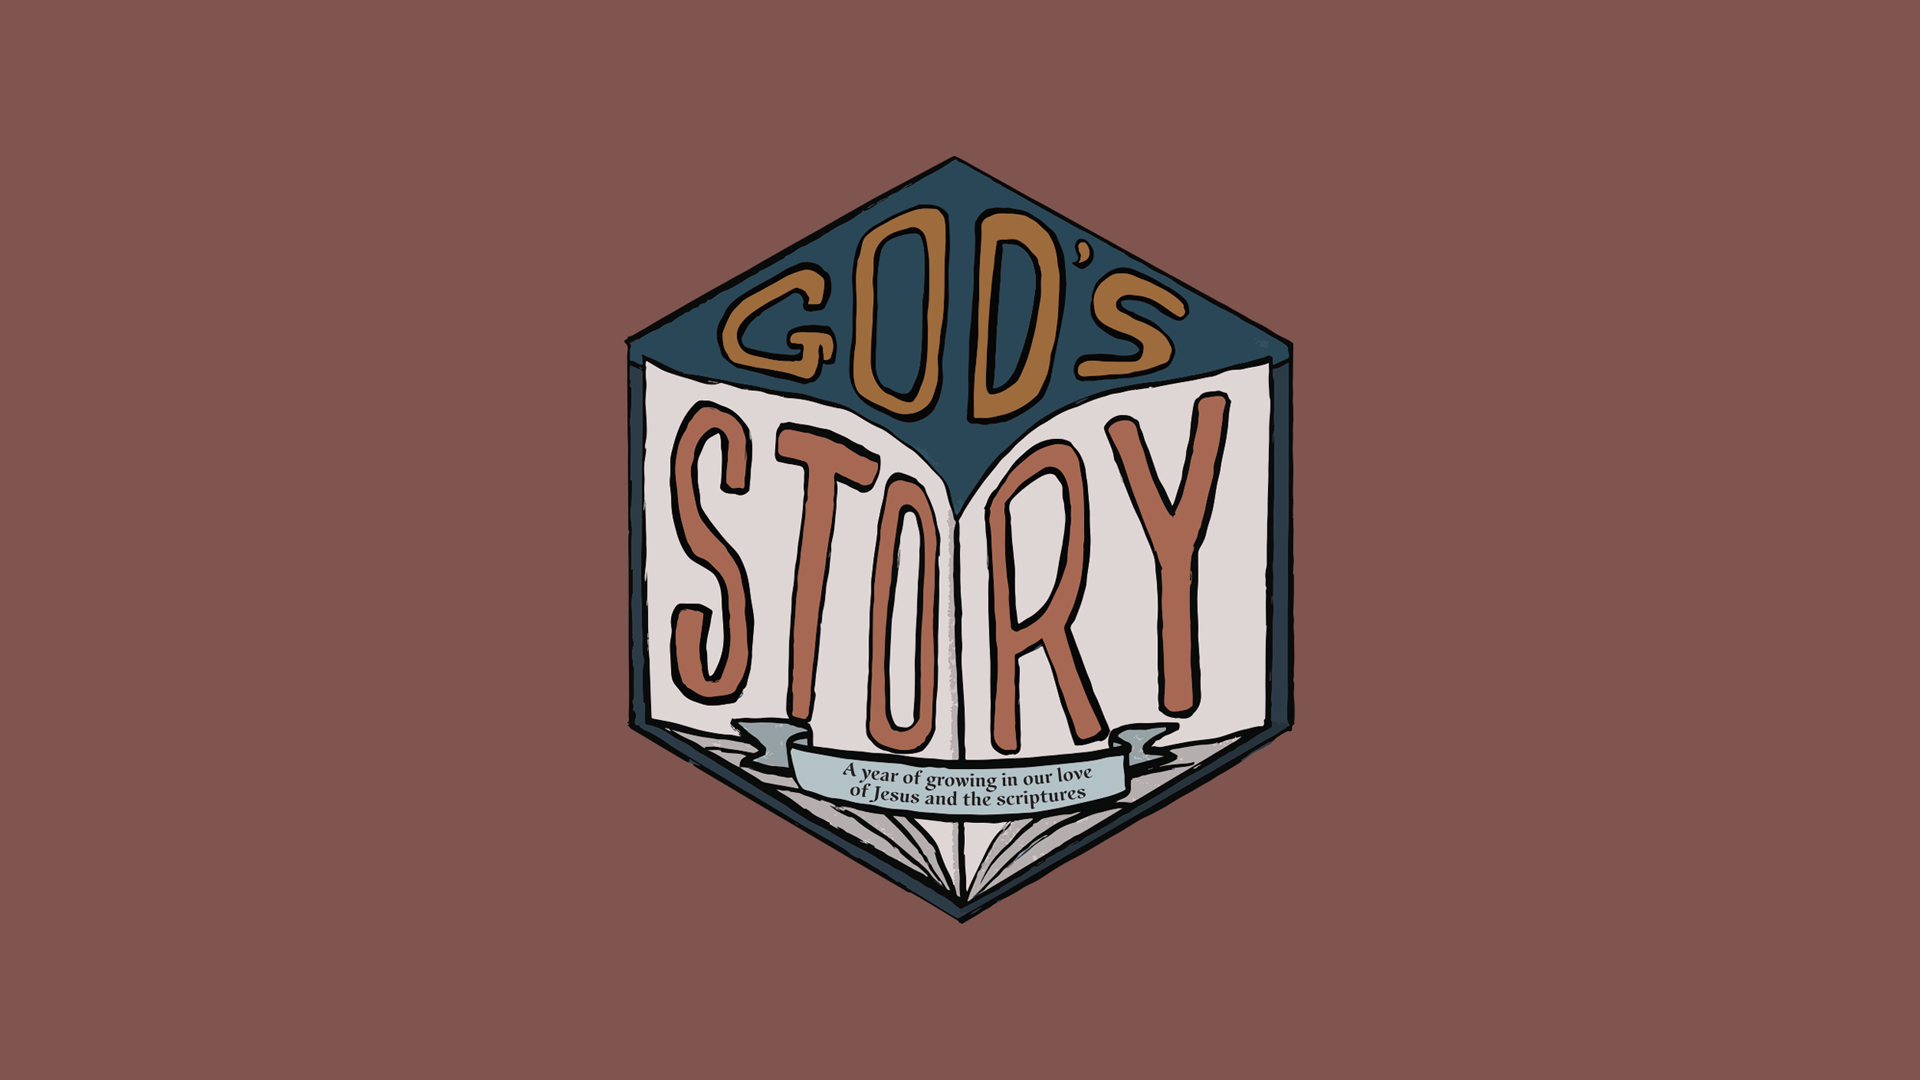 Entering Into God’s Story